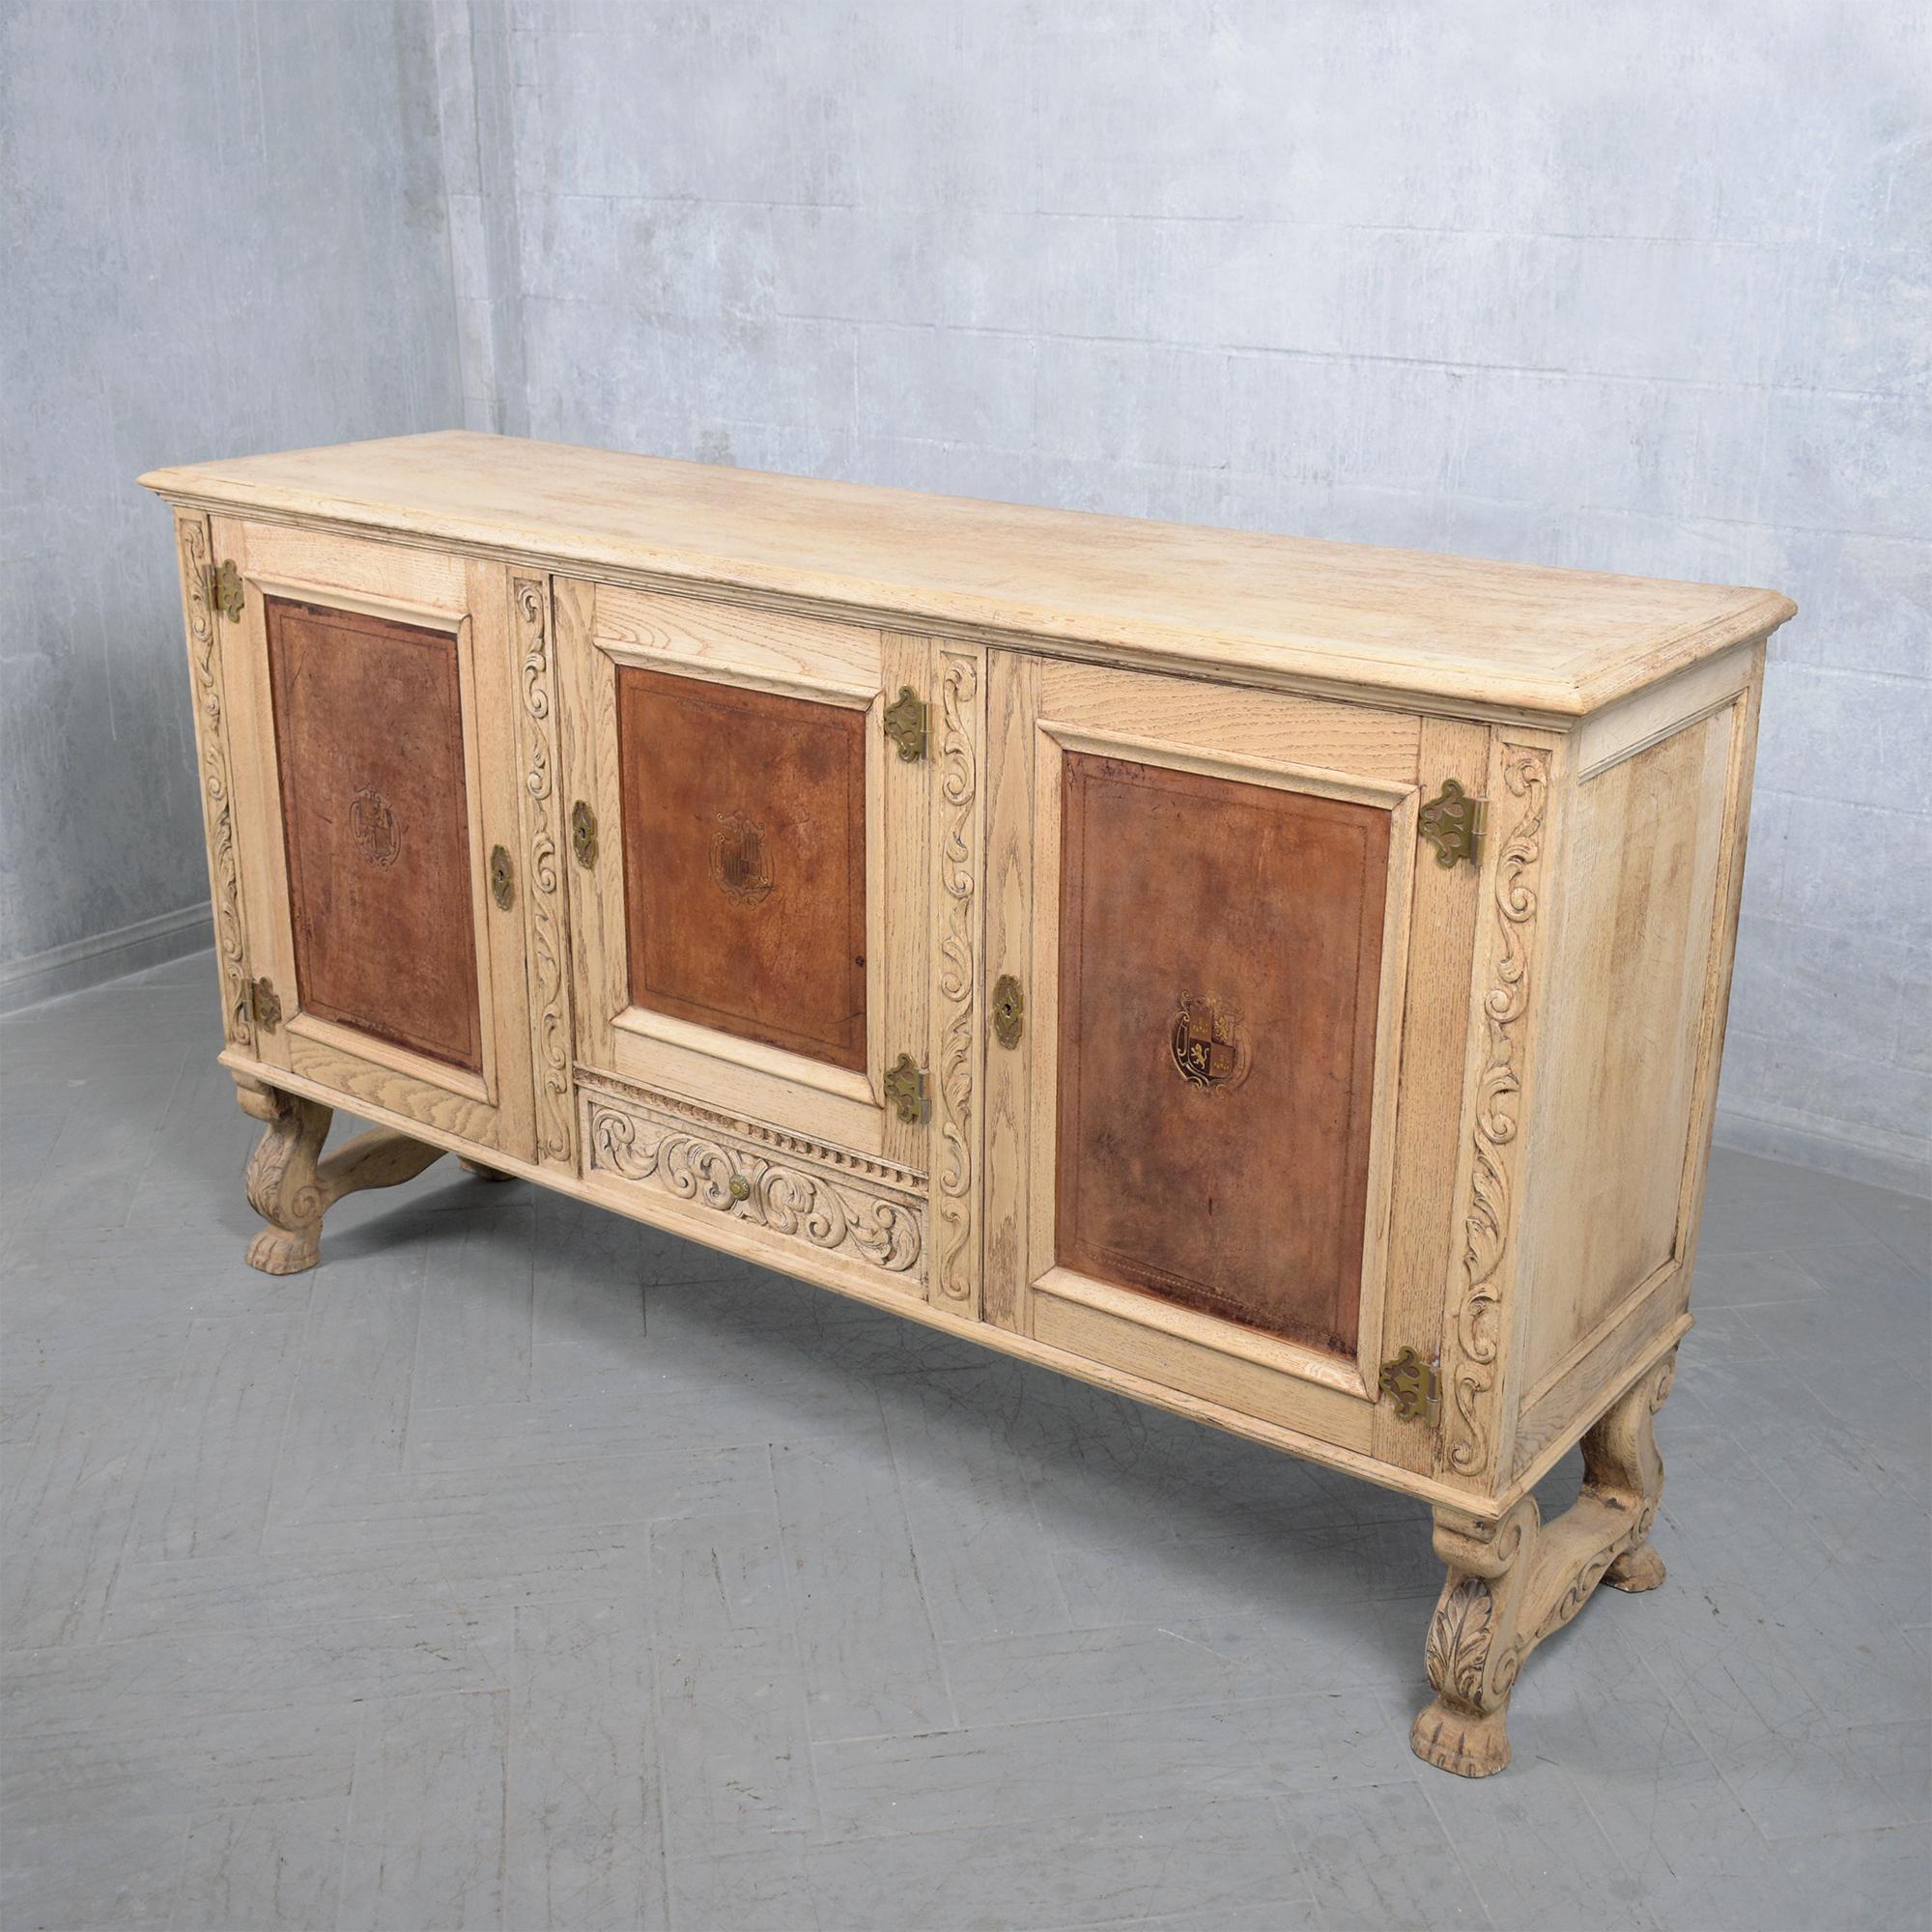 Antique French Oak Buffet with Bleached Finish and Carved Details For Sale 5